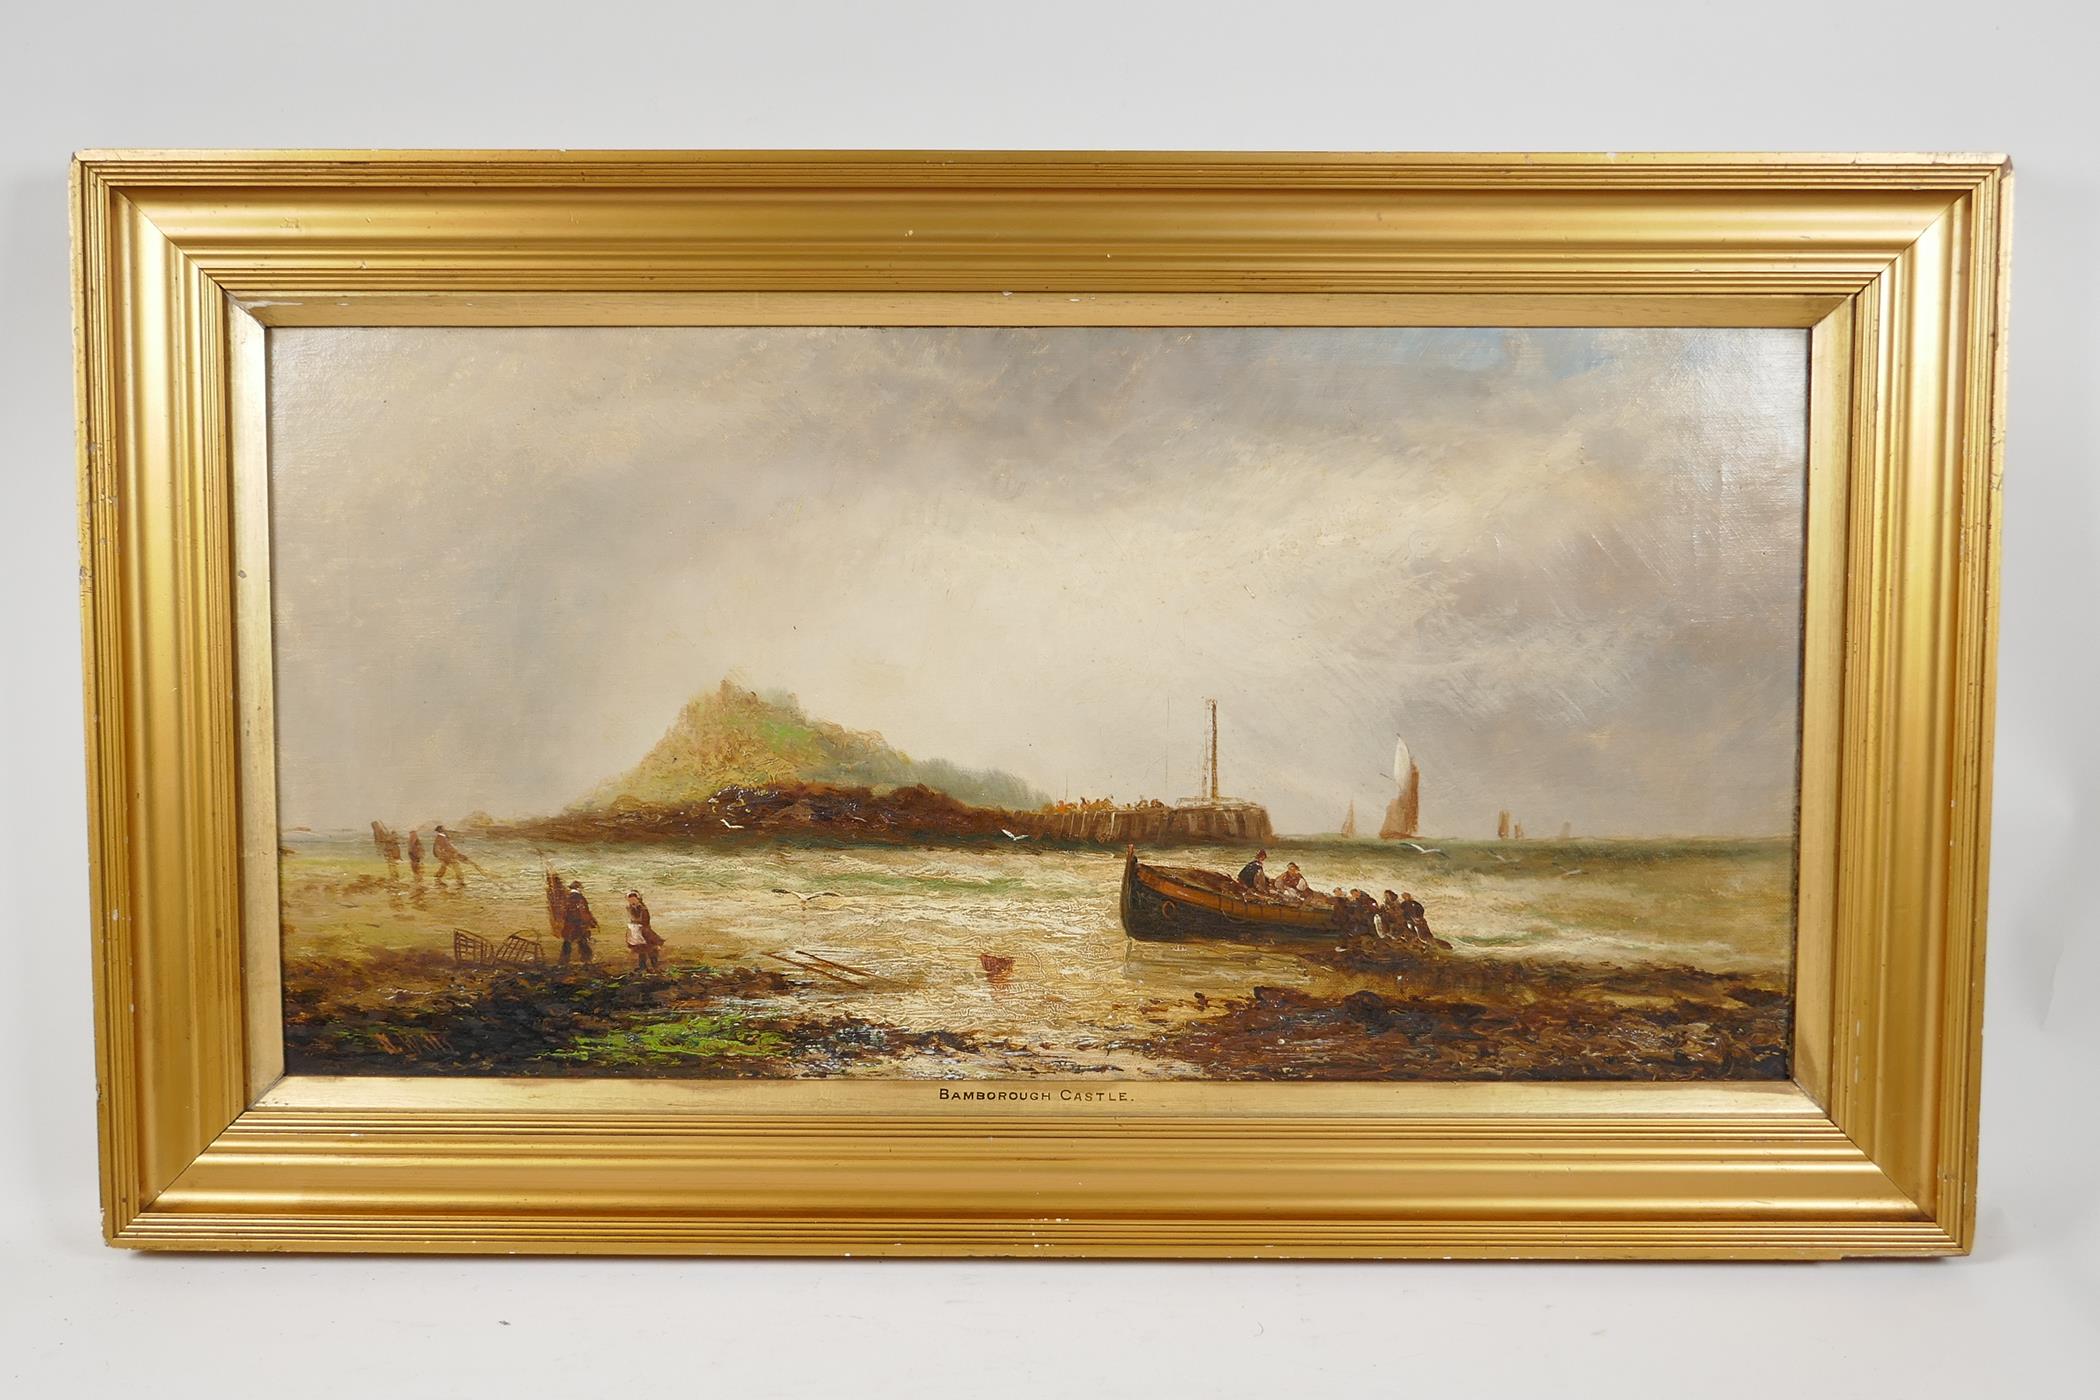 D. Watts, fisherfolk on a beach, "Bamborough Castle", signed C19th oil on canvas, 12" x 24" - Image 2 of 6